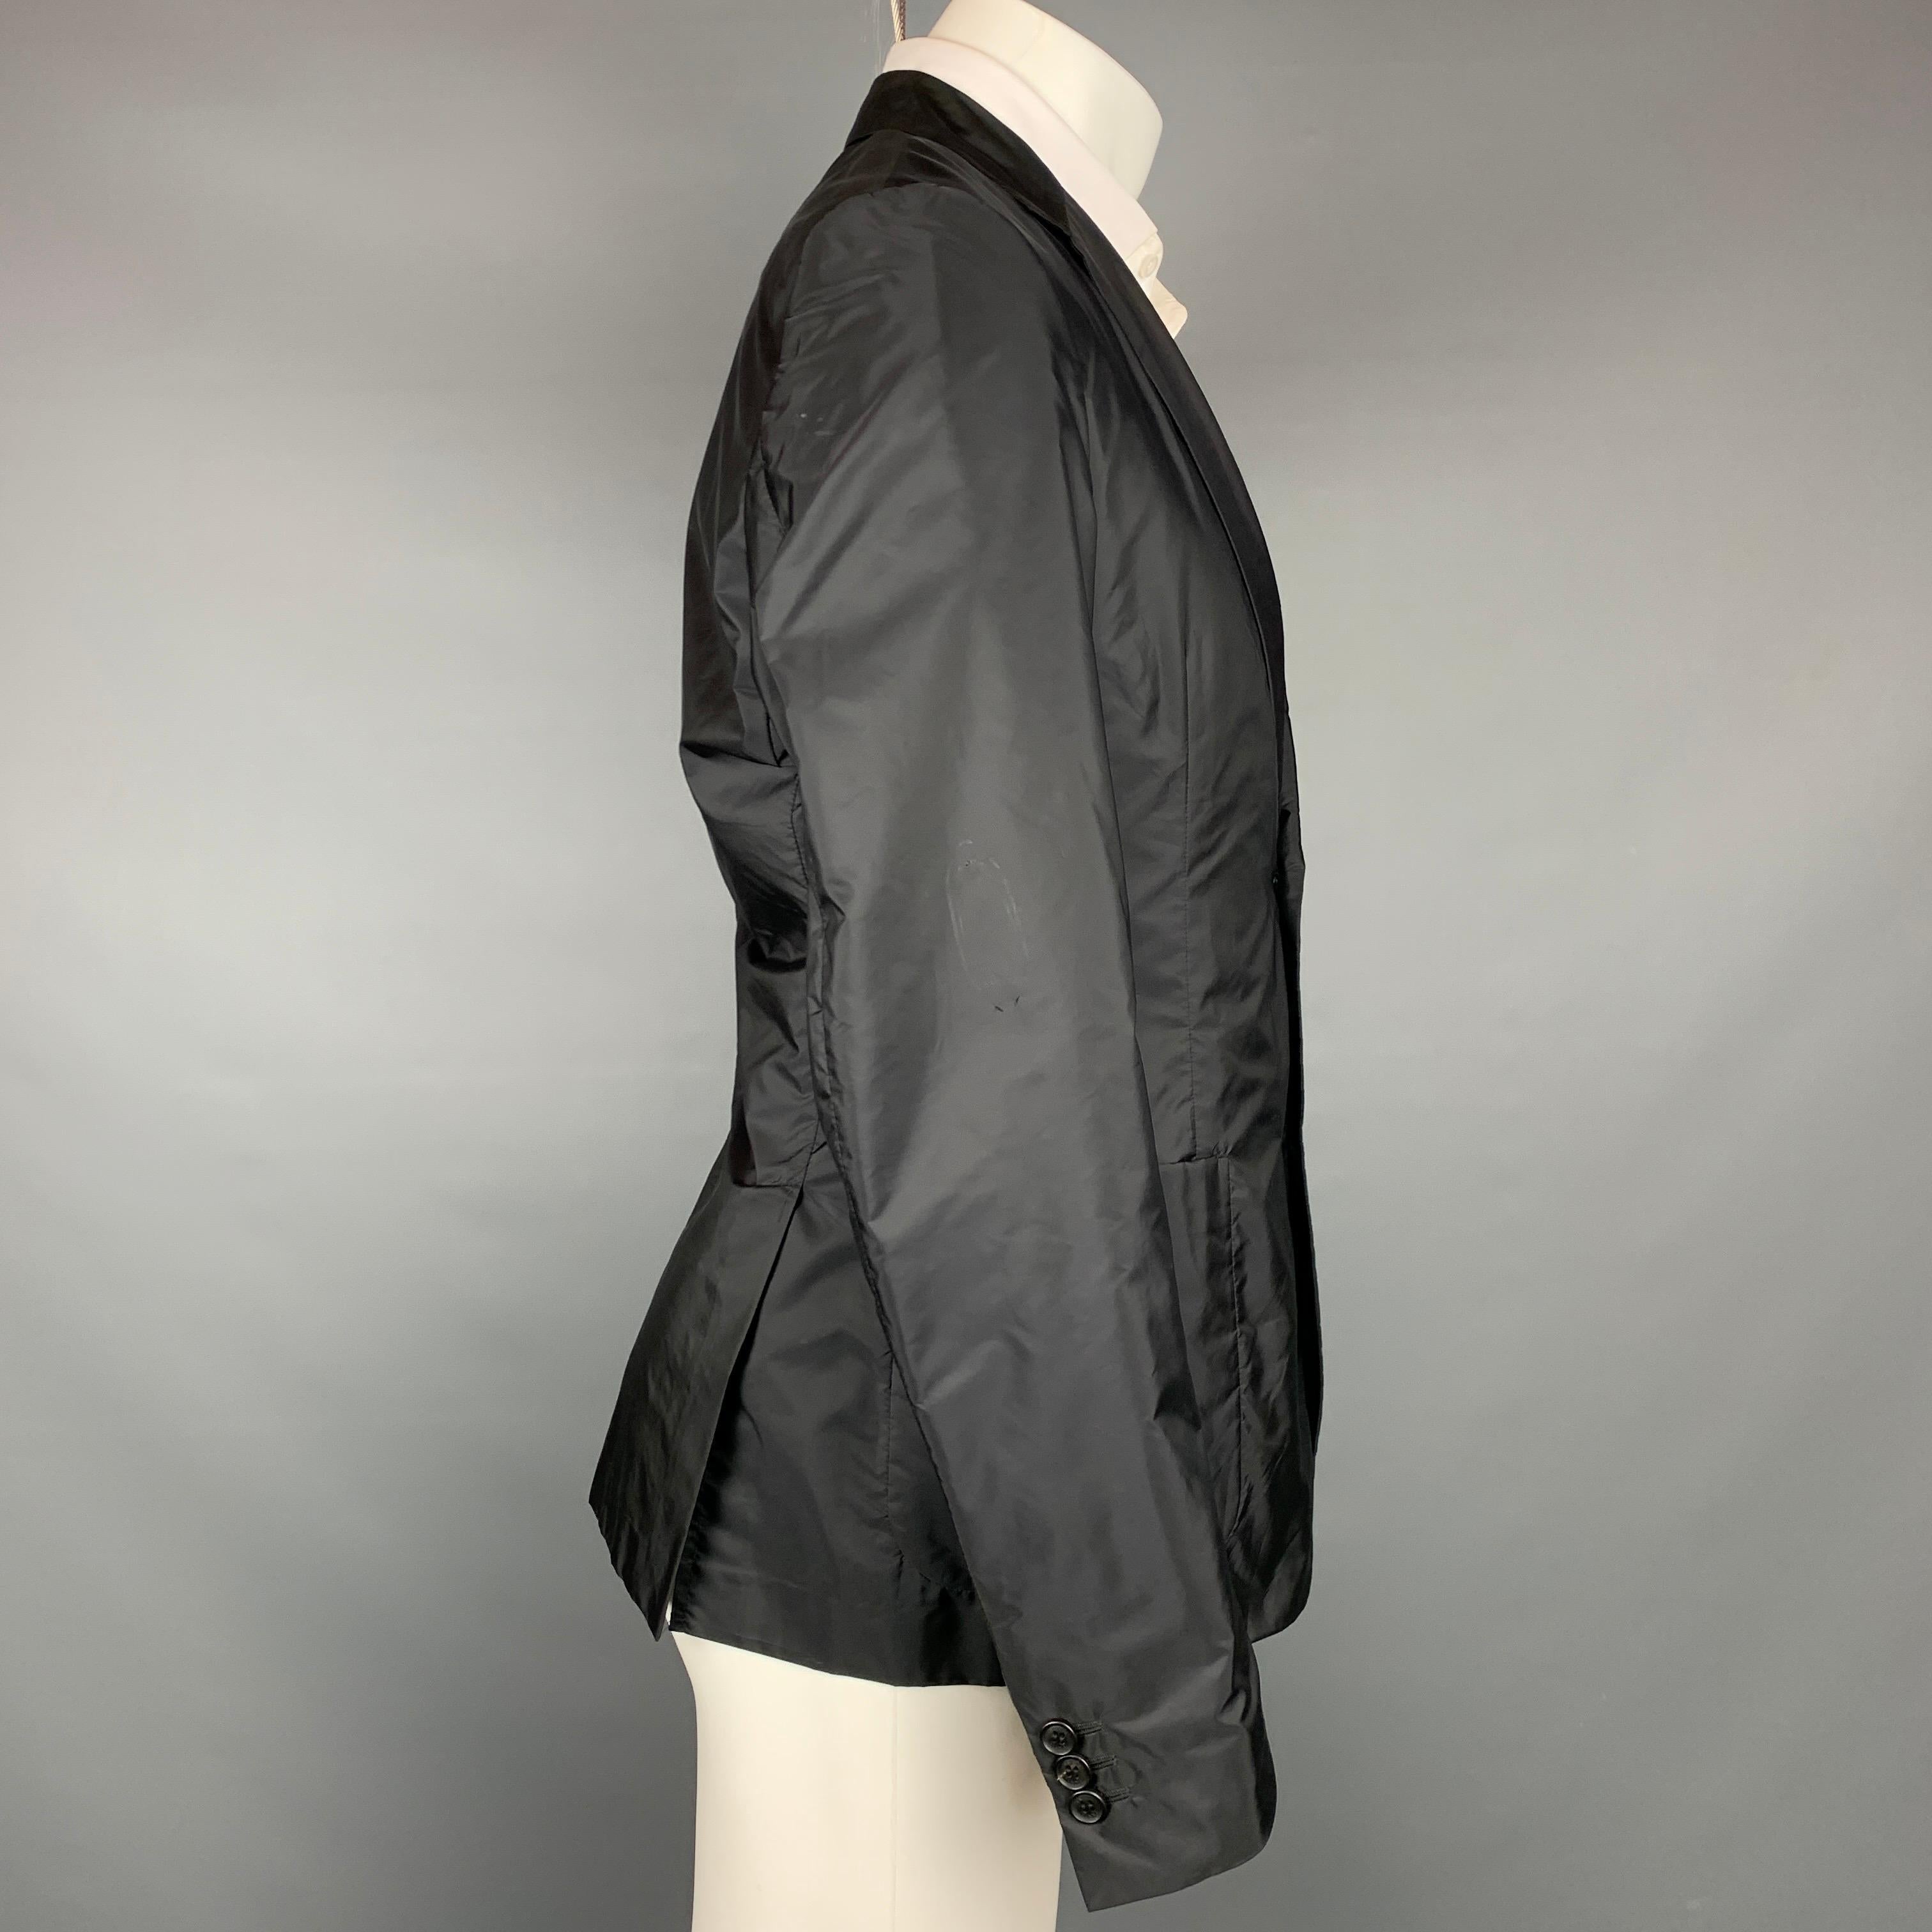 PRADA sport coat comes in a black nylon with a half liner featuring a notch lapel, patch pockets, and a two button closure. 

Very Good Pre-Owned Condition.
Marked: 50

Measurements:

Shoulder: 17.5 in.
Chest: 40 in.
Sleeve: 26.5 in.
Length: 27.5